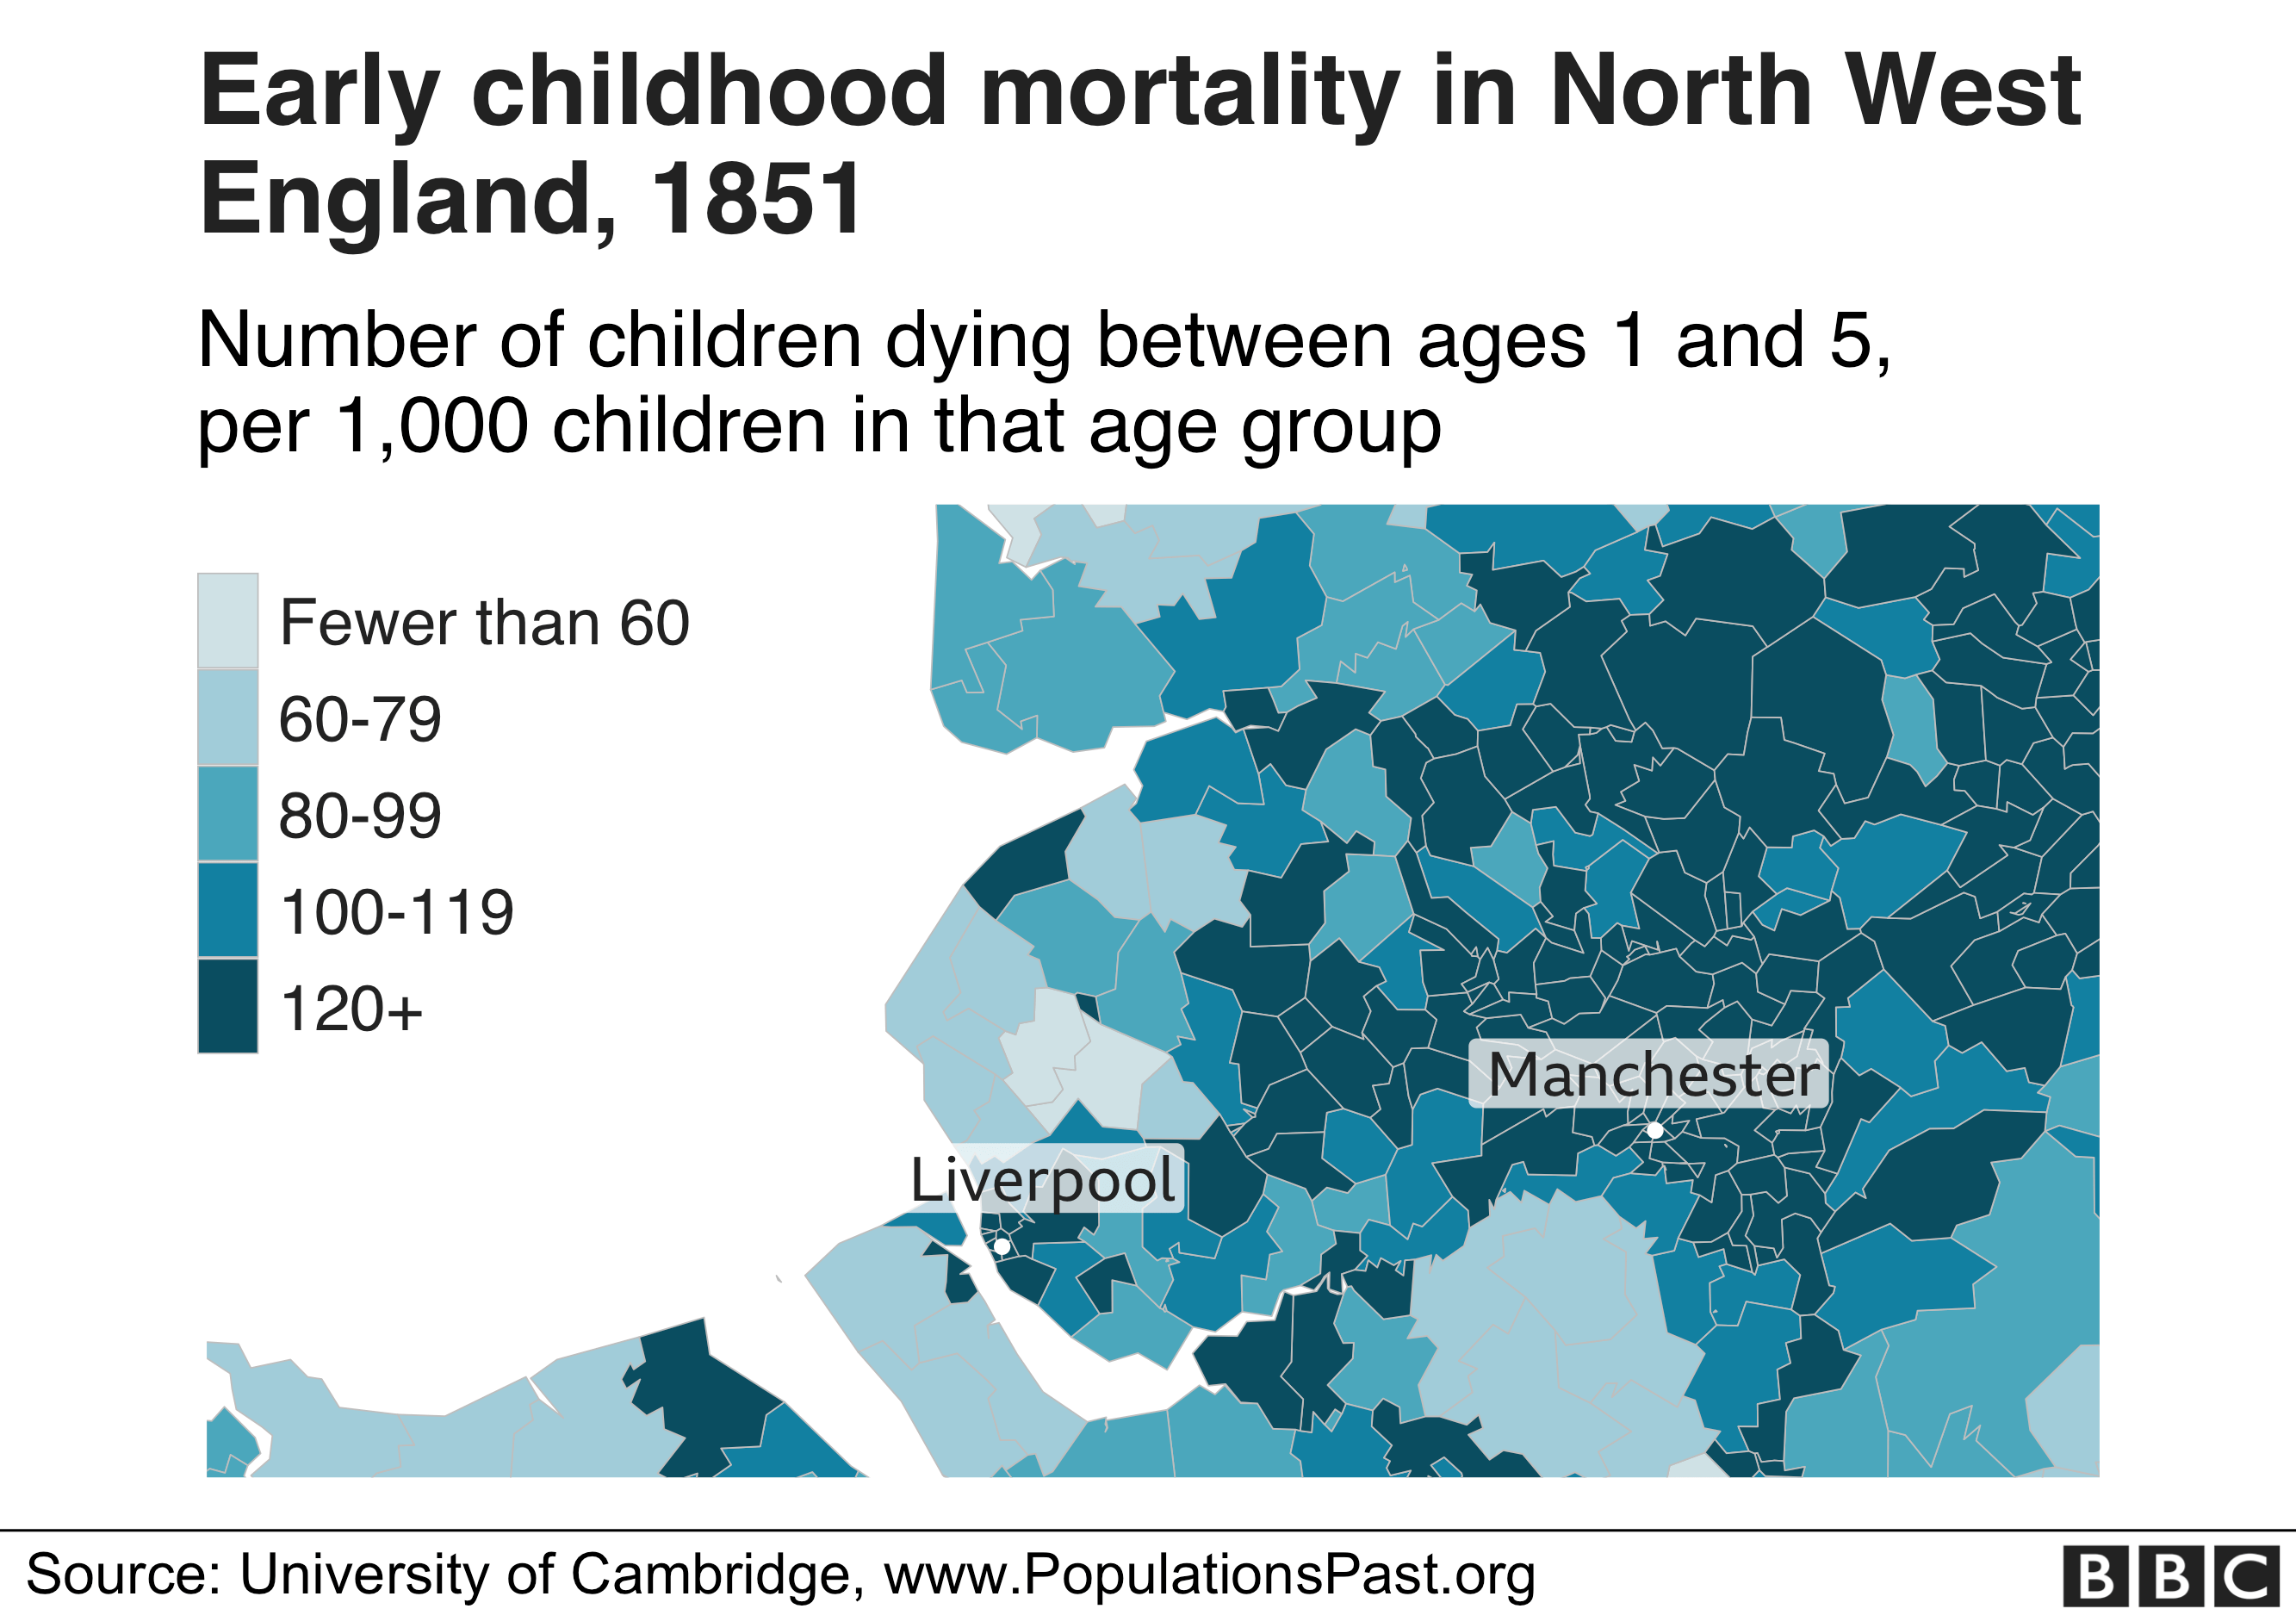 Child mortality in 1851 in NW England